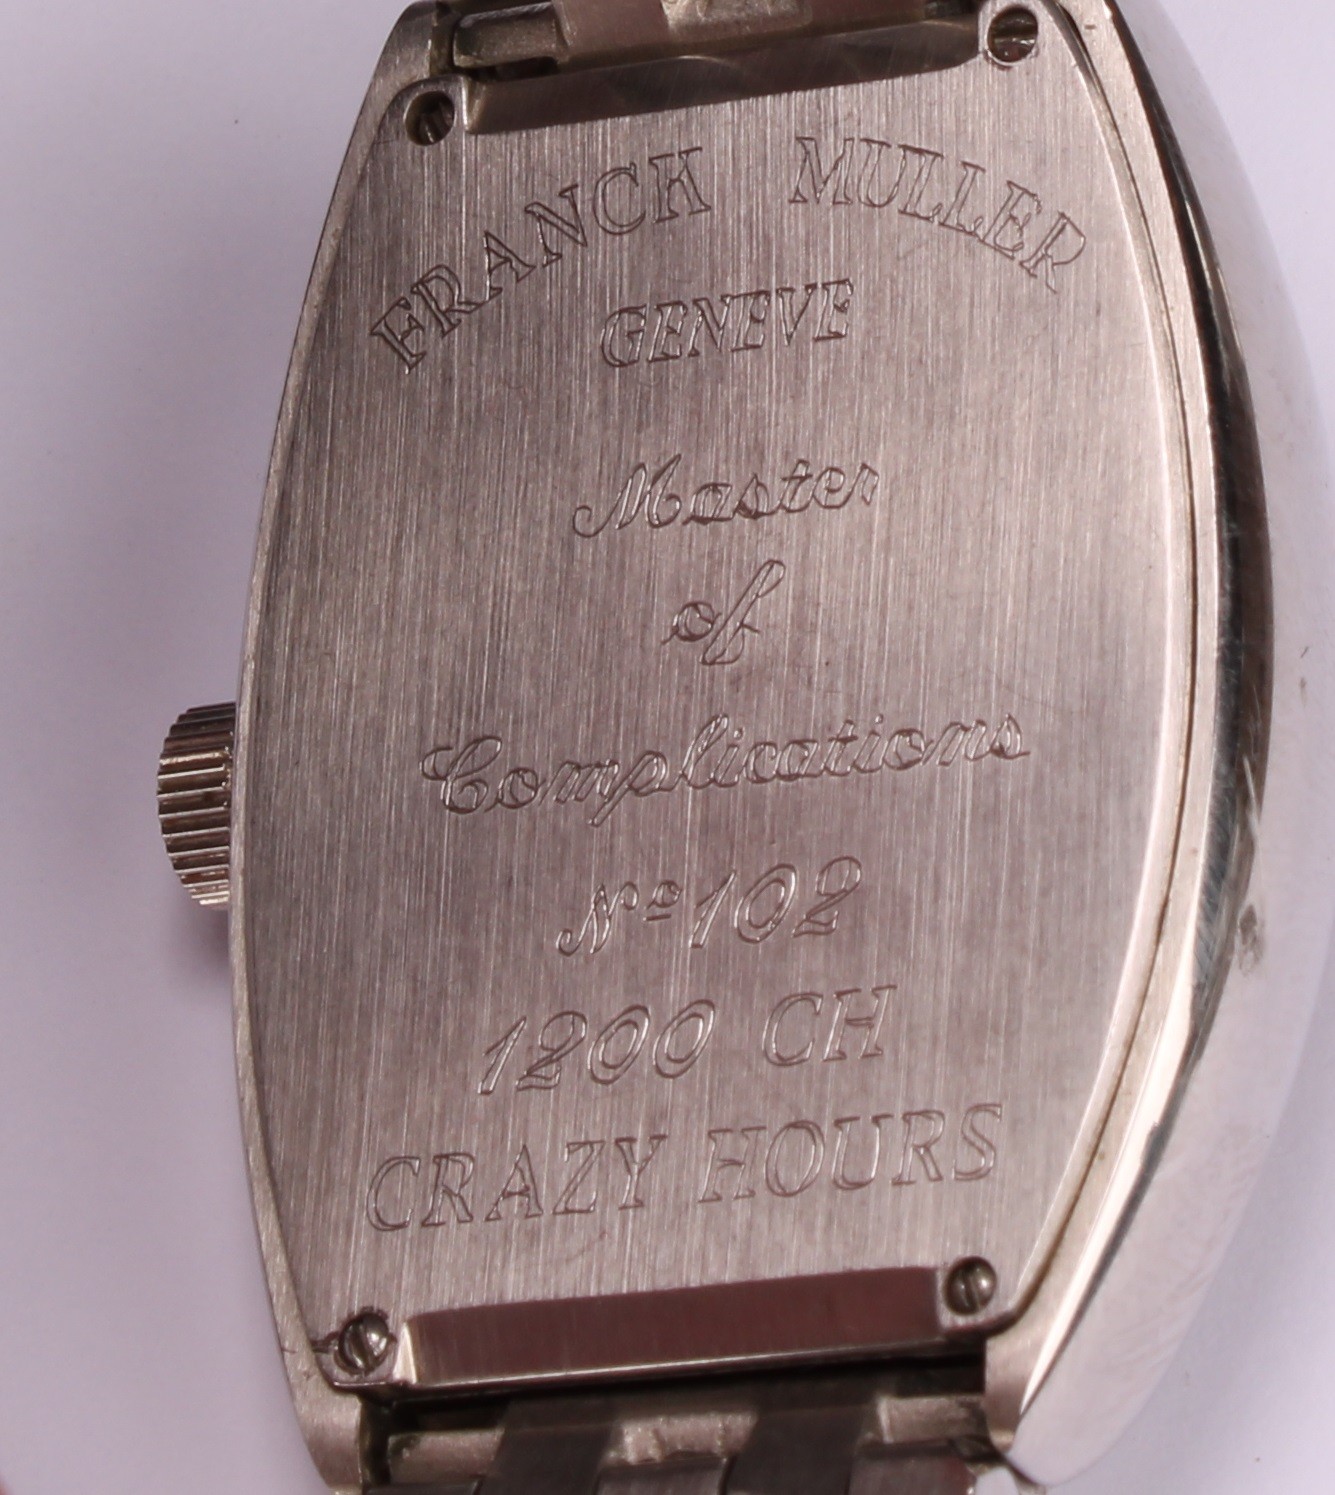 ***LOT WITHDRAWN ***A Franck Muller of Geneve stainless steel watch, Crazy Color Dreams (sic.), - Image 4 of 6